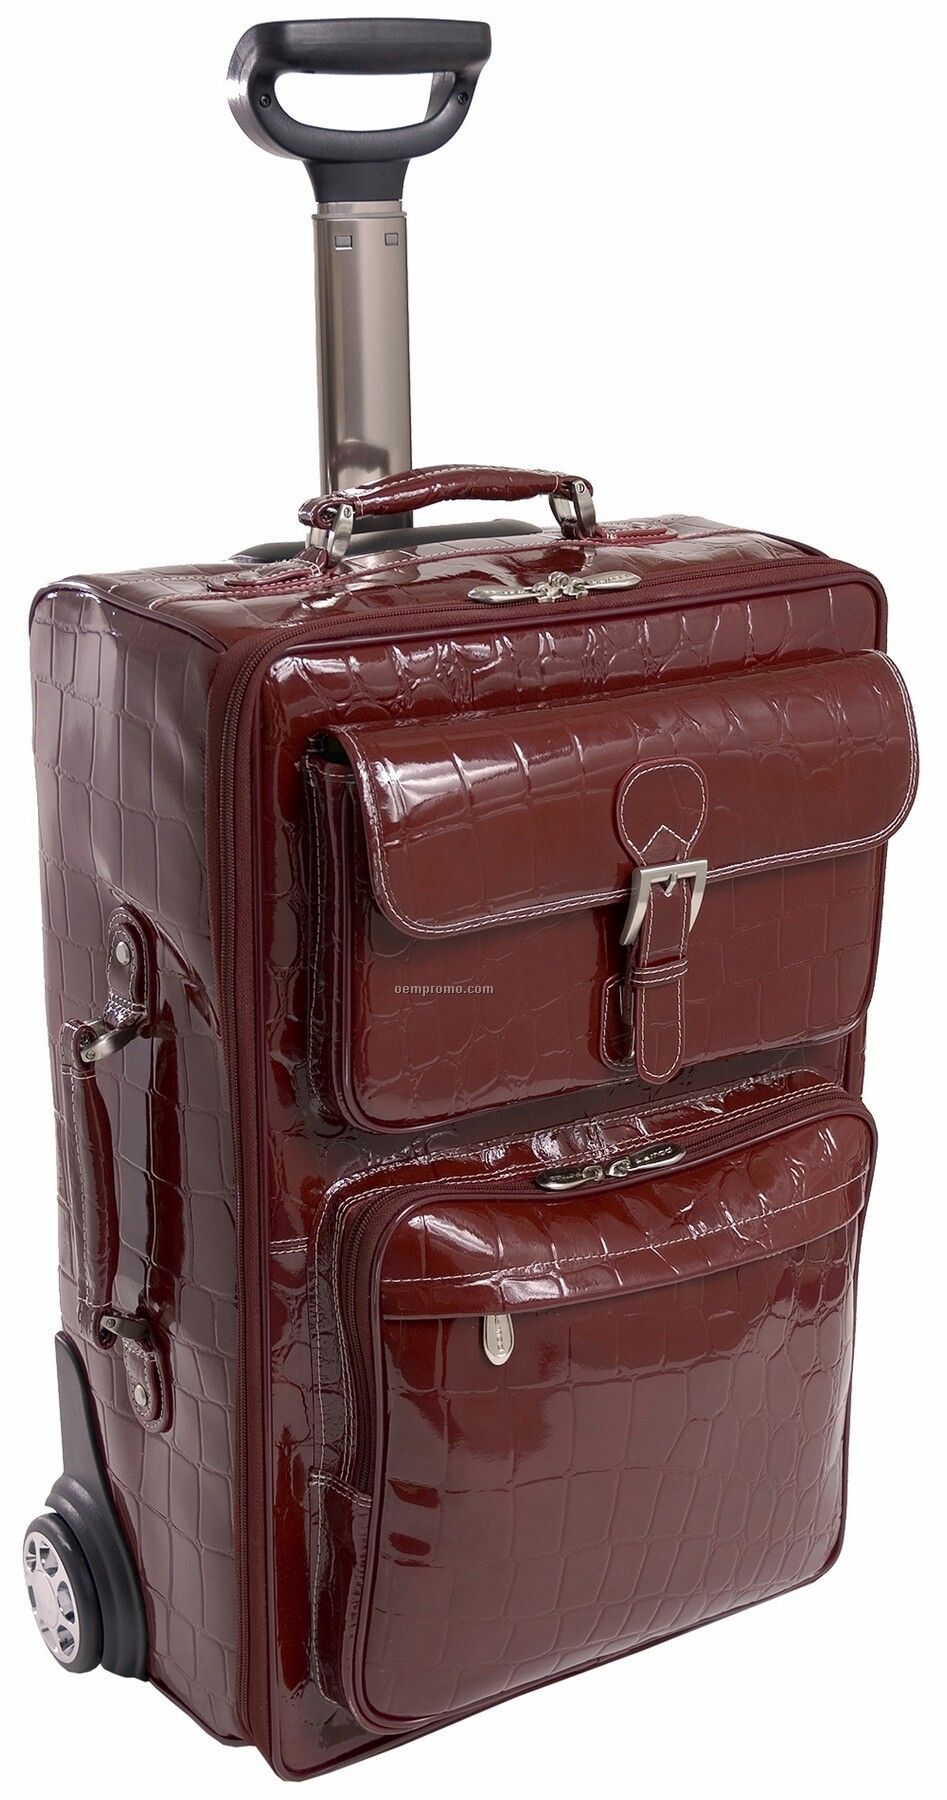 Cappuccini - 21" Ladies' Carry-on- Cherry Red